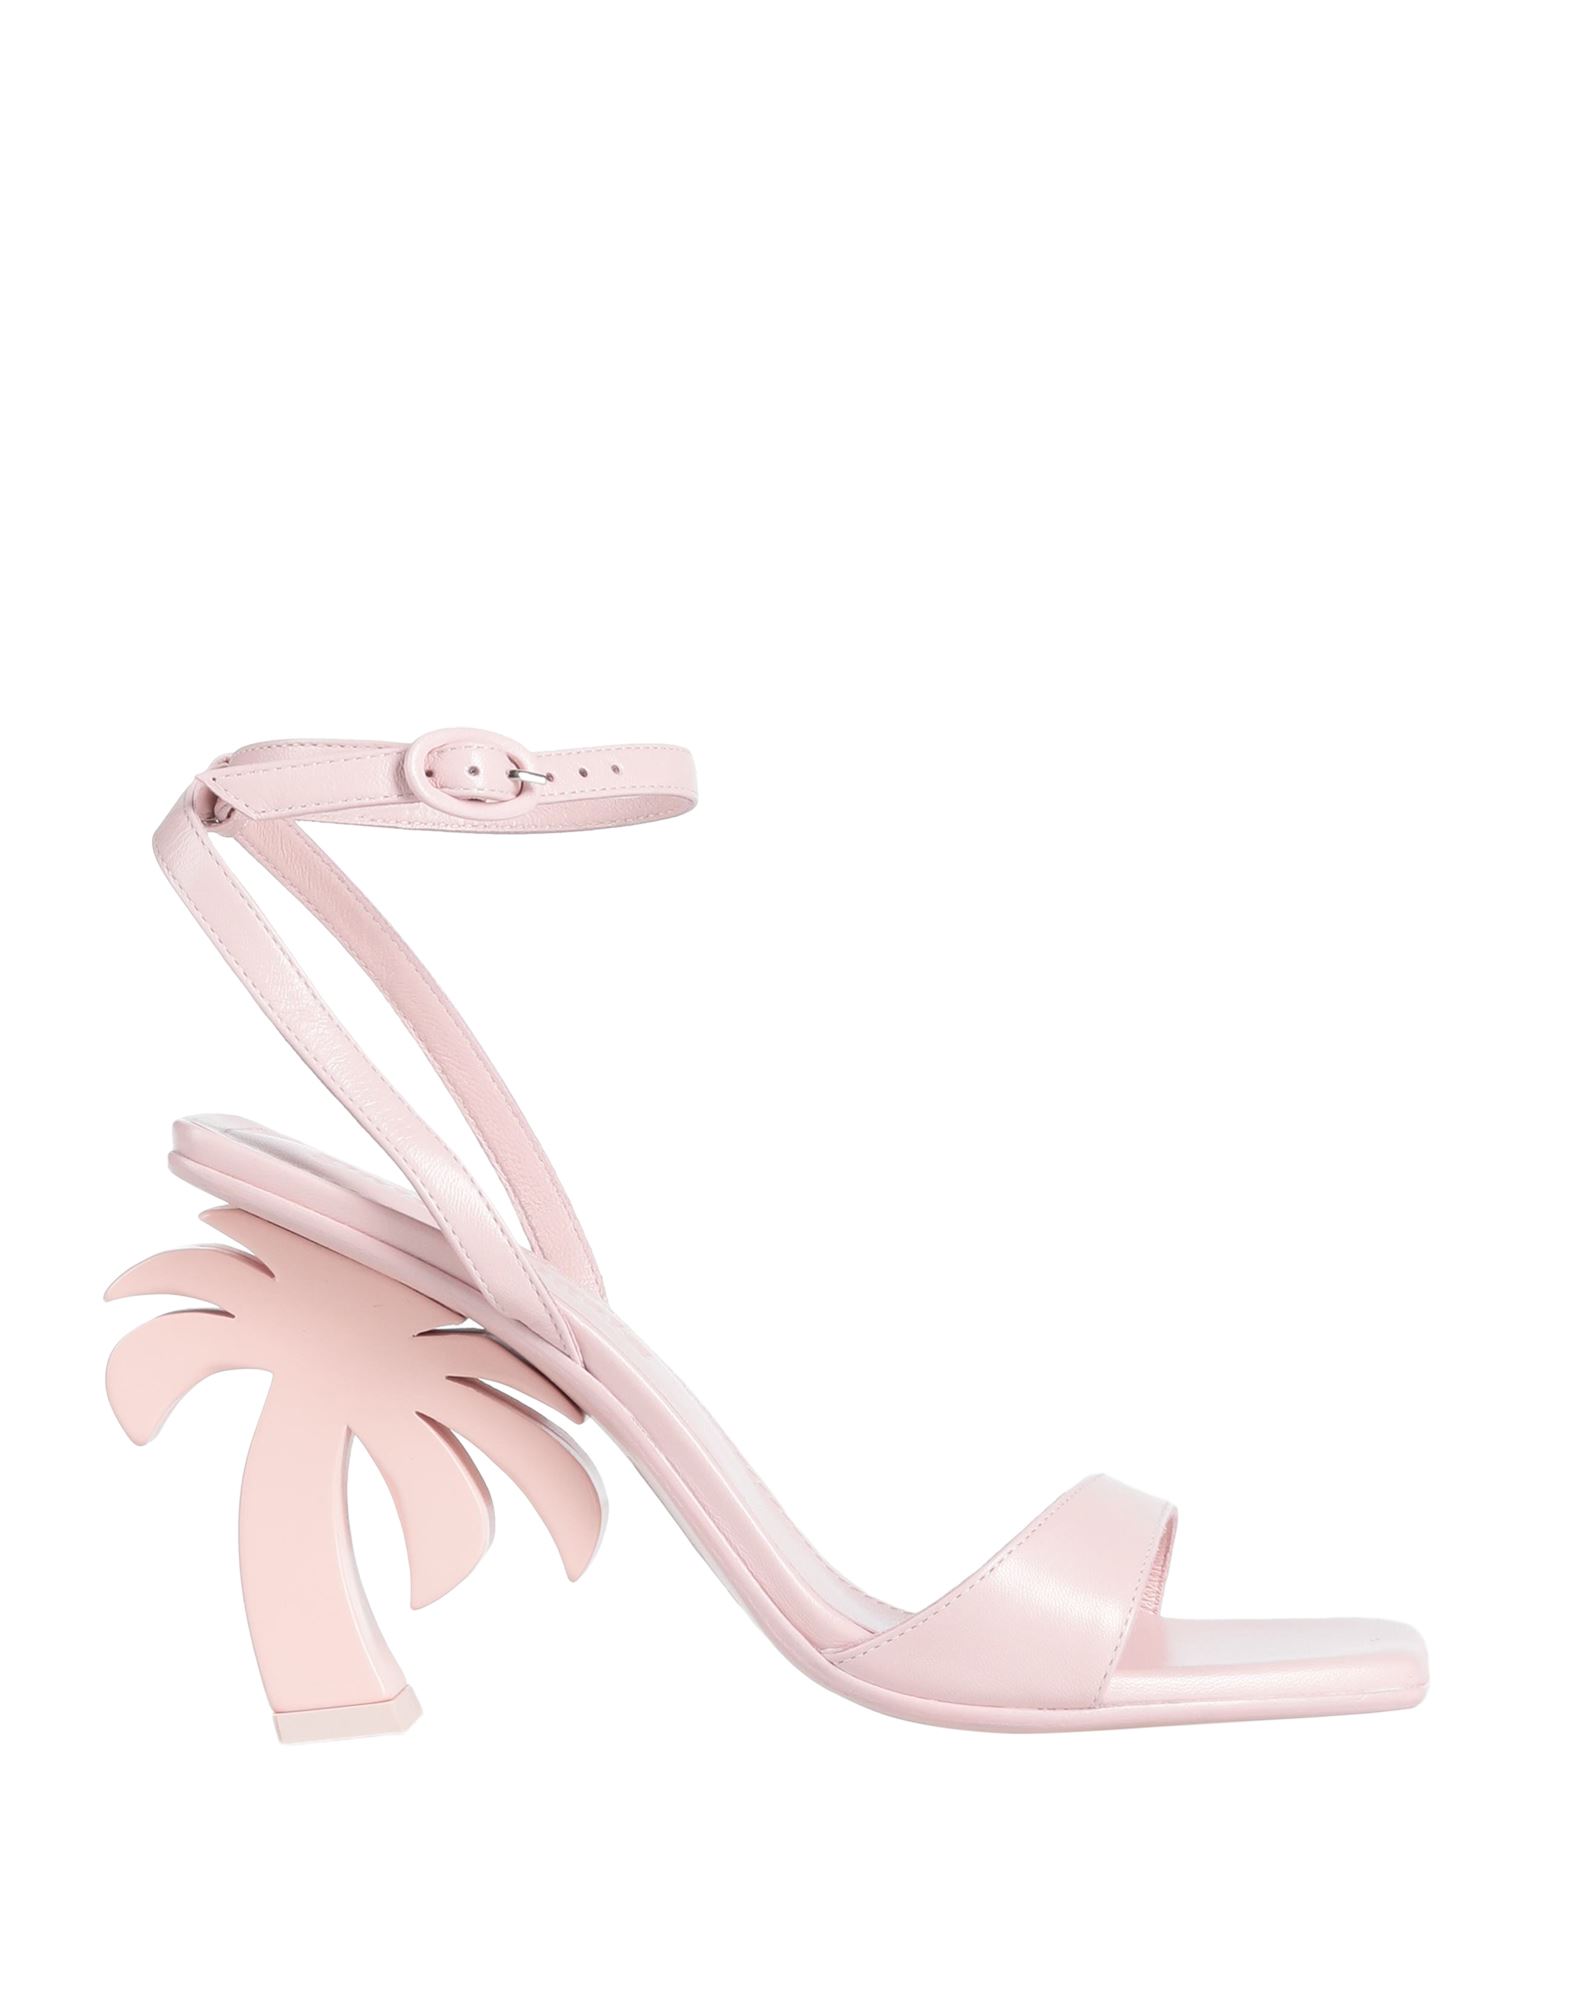 PALM ANGELS PALM ANGELS WOMAN SANDALS LIGHT PINK SIZE 5 SOFT LEATHER